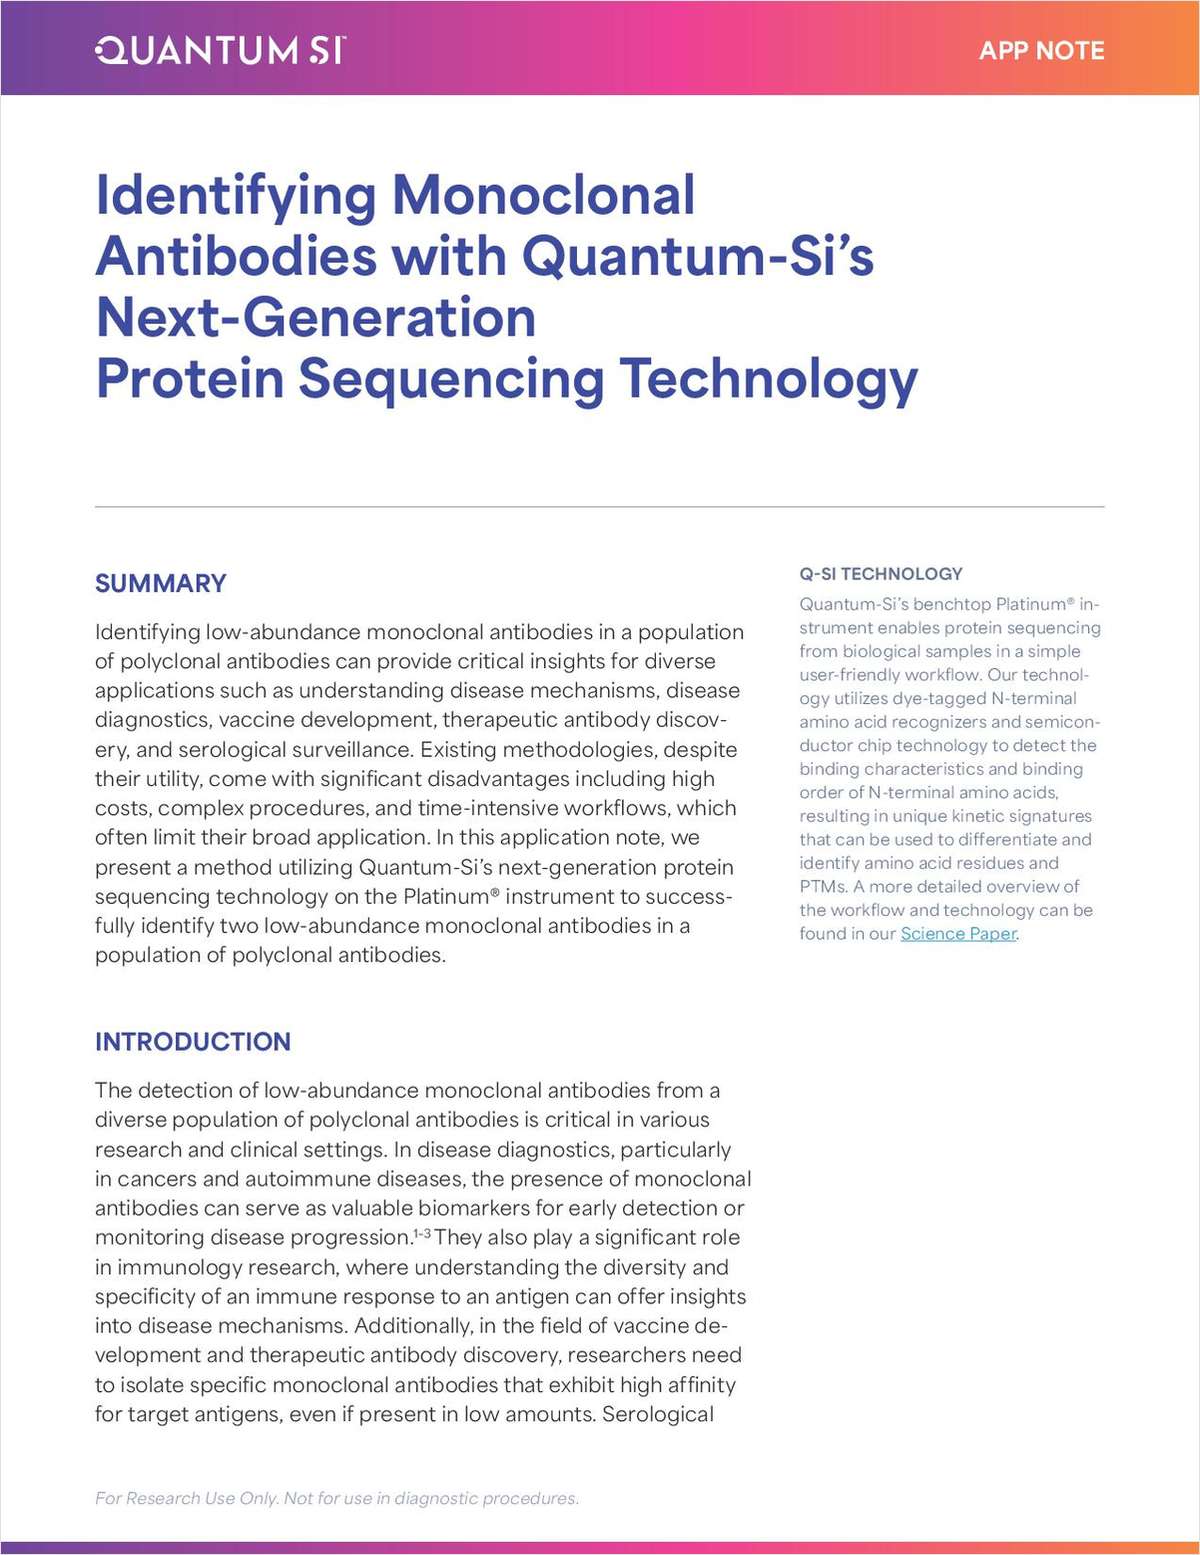 Identifying Monoclonal Antibodies with Quantum-Si's Next-Generation Protein Sequencing Technology